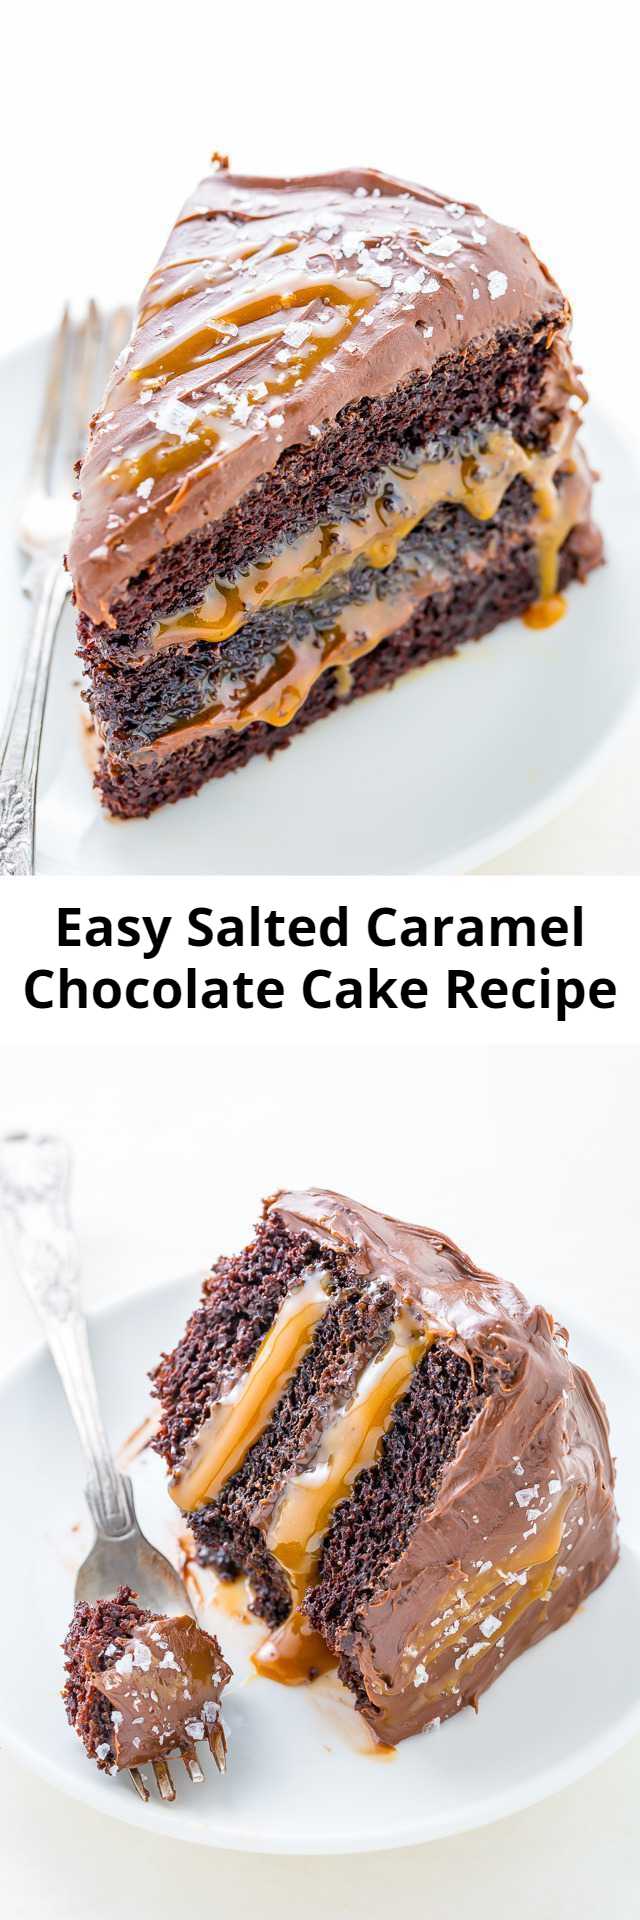 Easy Salted Caramel Chocolate Cake Recipe - Three layers of Salted Caramel Chocolate Cake slathered in homemade Chocolate Frosting. This Salted Caramel Chocolate Cake is moist and sinfully decadent! So if you love chocolate and caramel, you’ll LOVE this easy recipe for how to make Chocolate Caramel Cake!